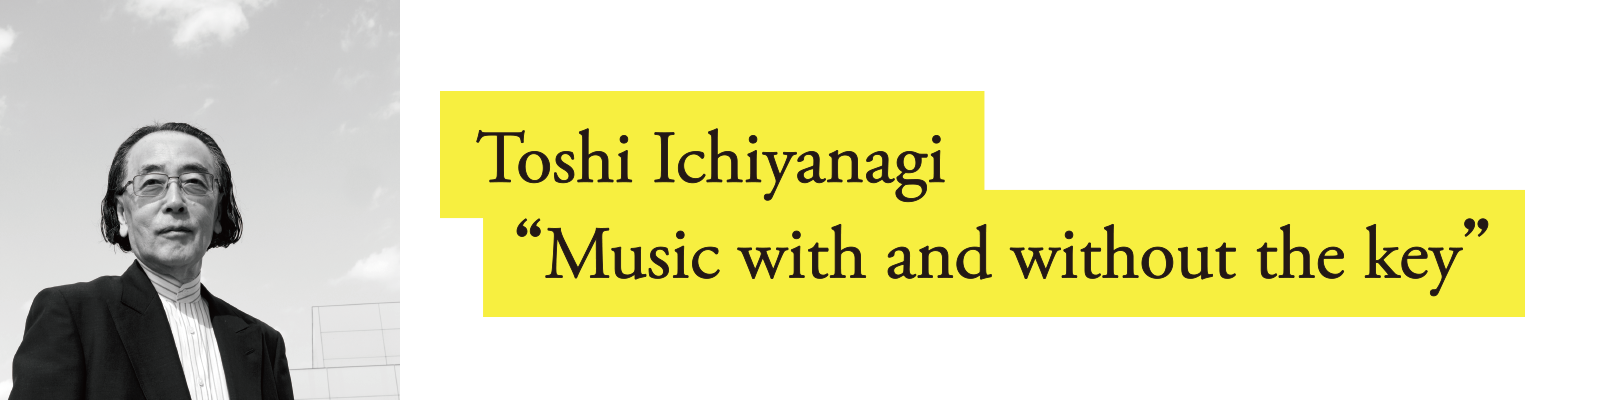 “Music with and without the key” by Toshi Ichiyanagi